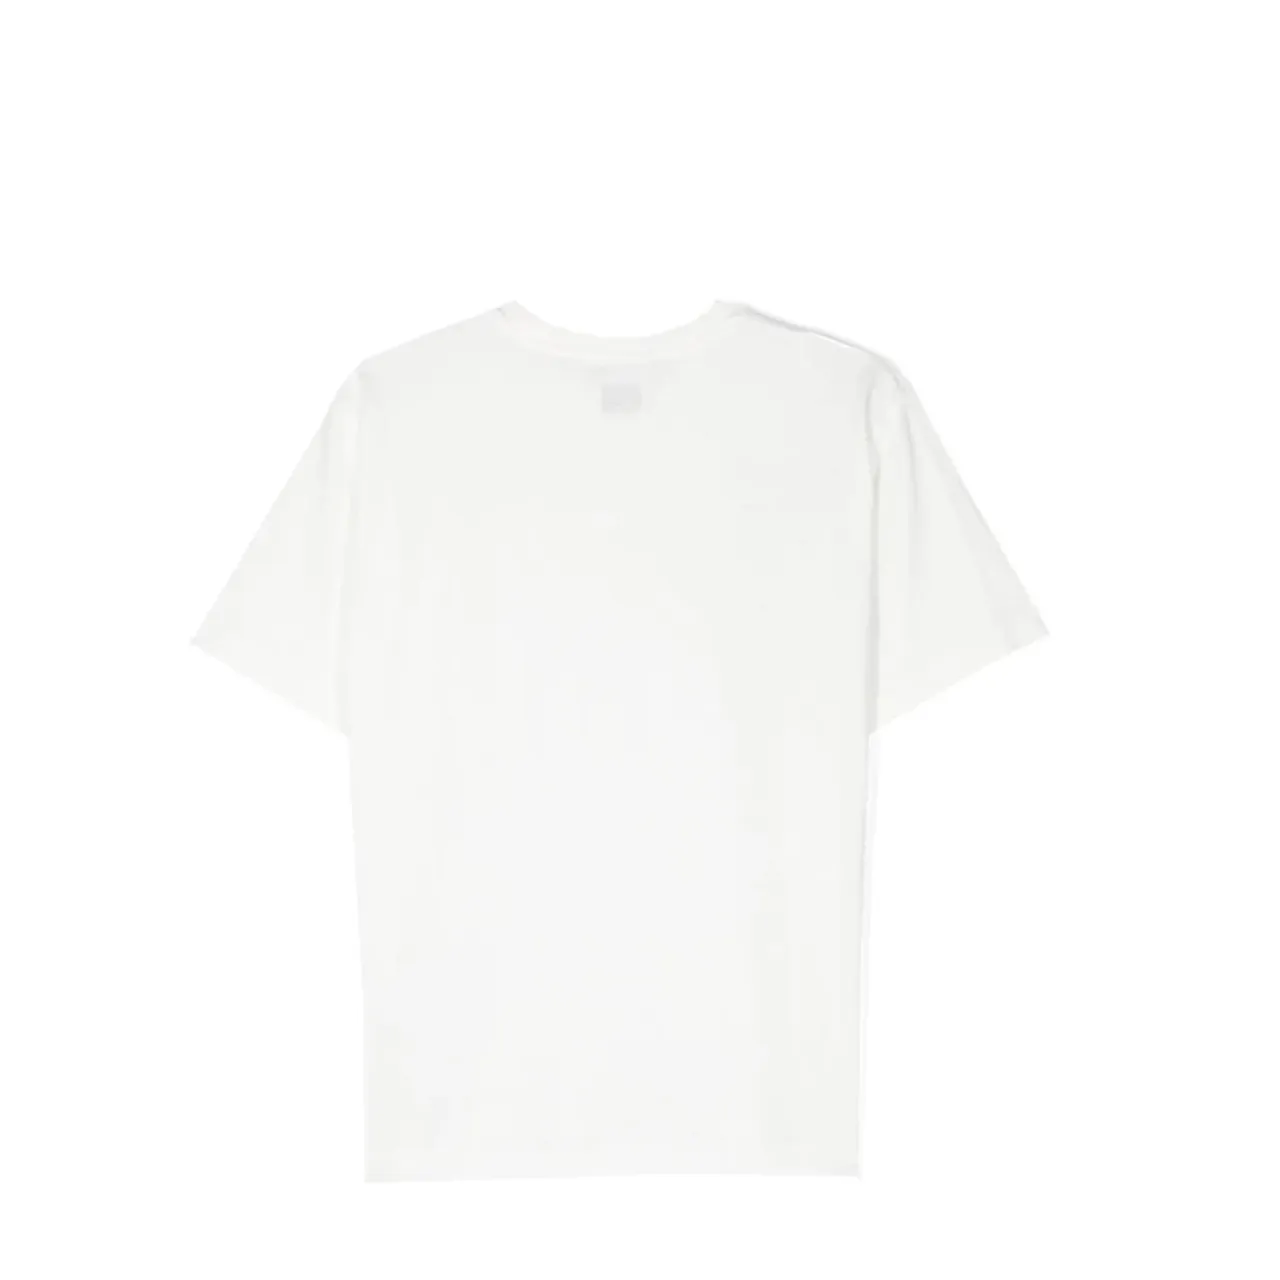 C.p. Company , White T-shirt with Gray Print and Pictorial Logo ,White male, Sizes: